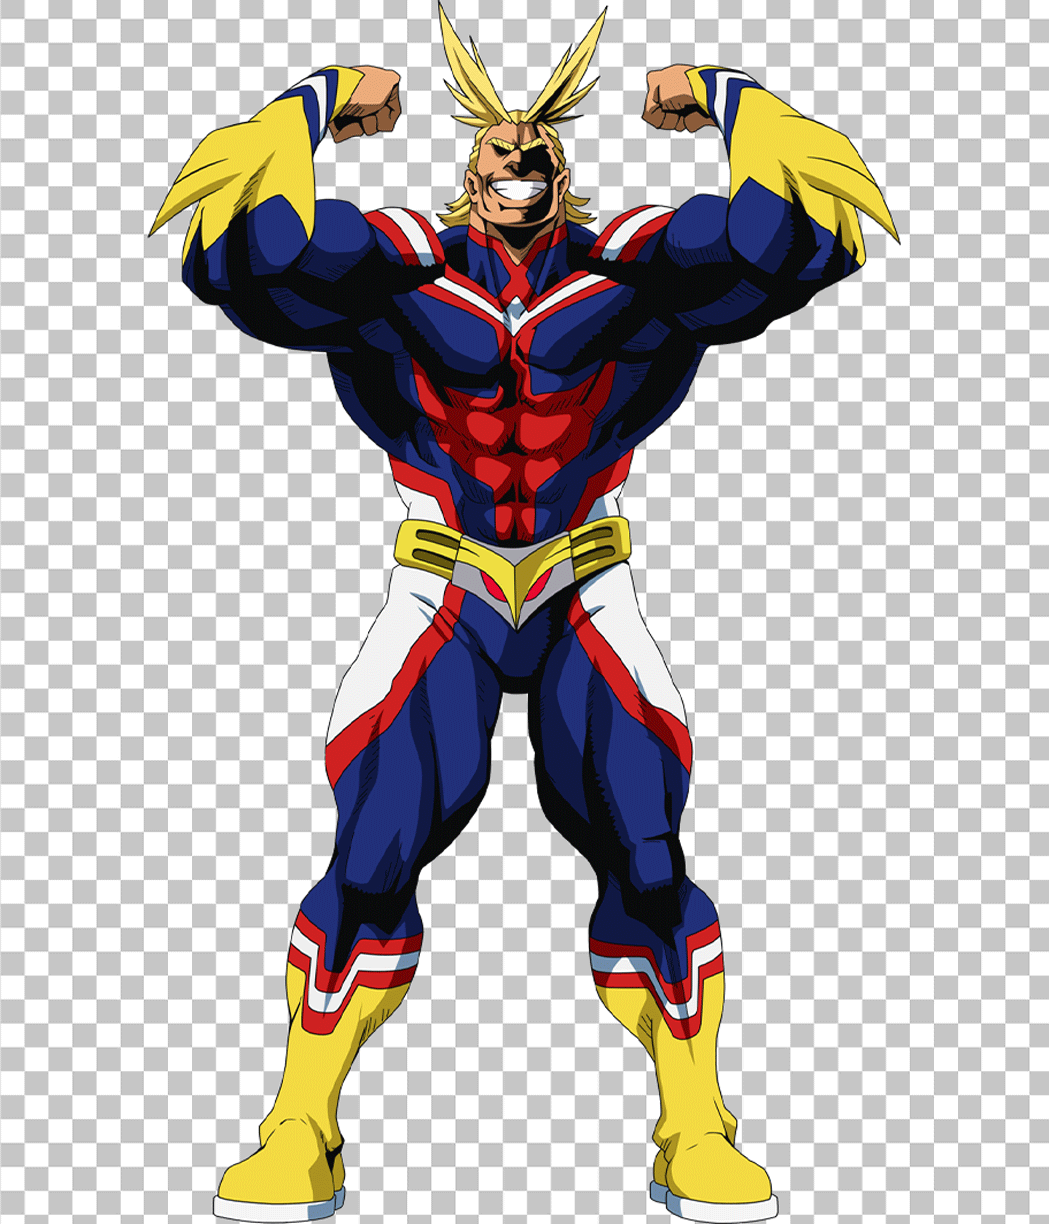 A transparent PNG image of All Might is smiling.